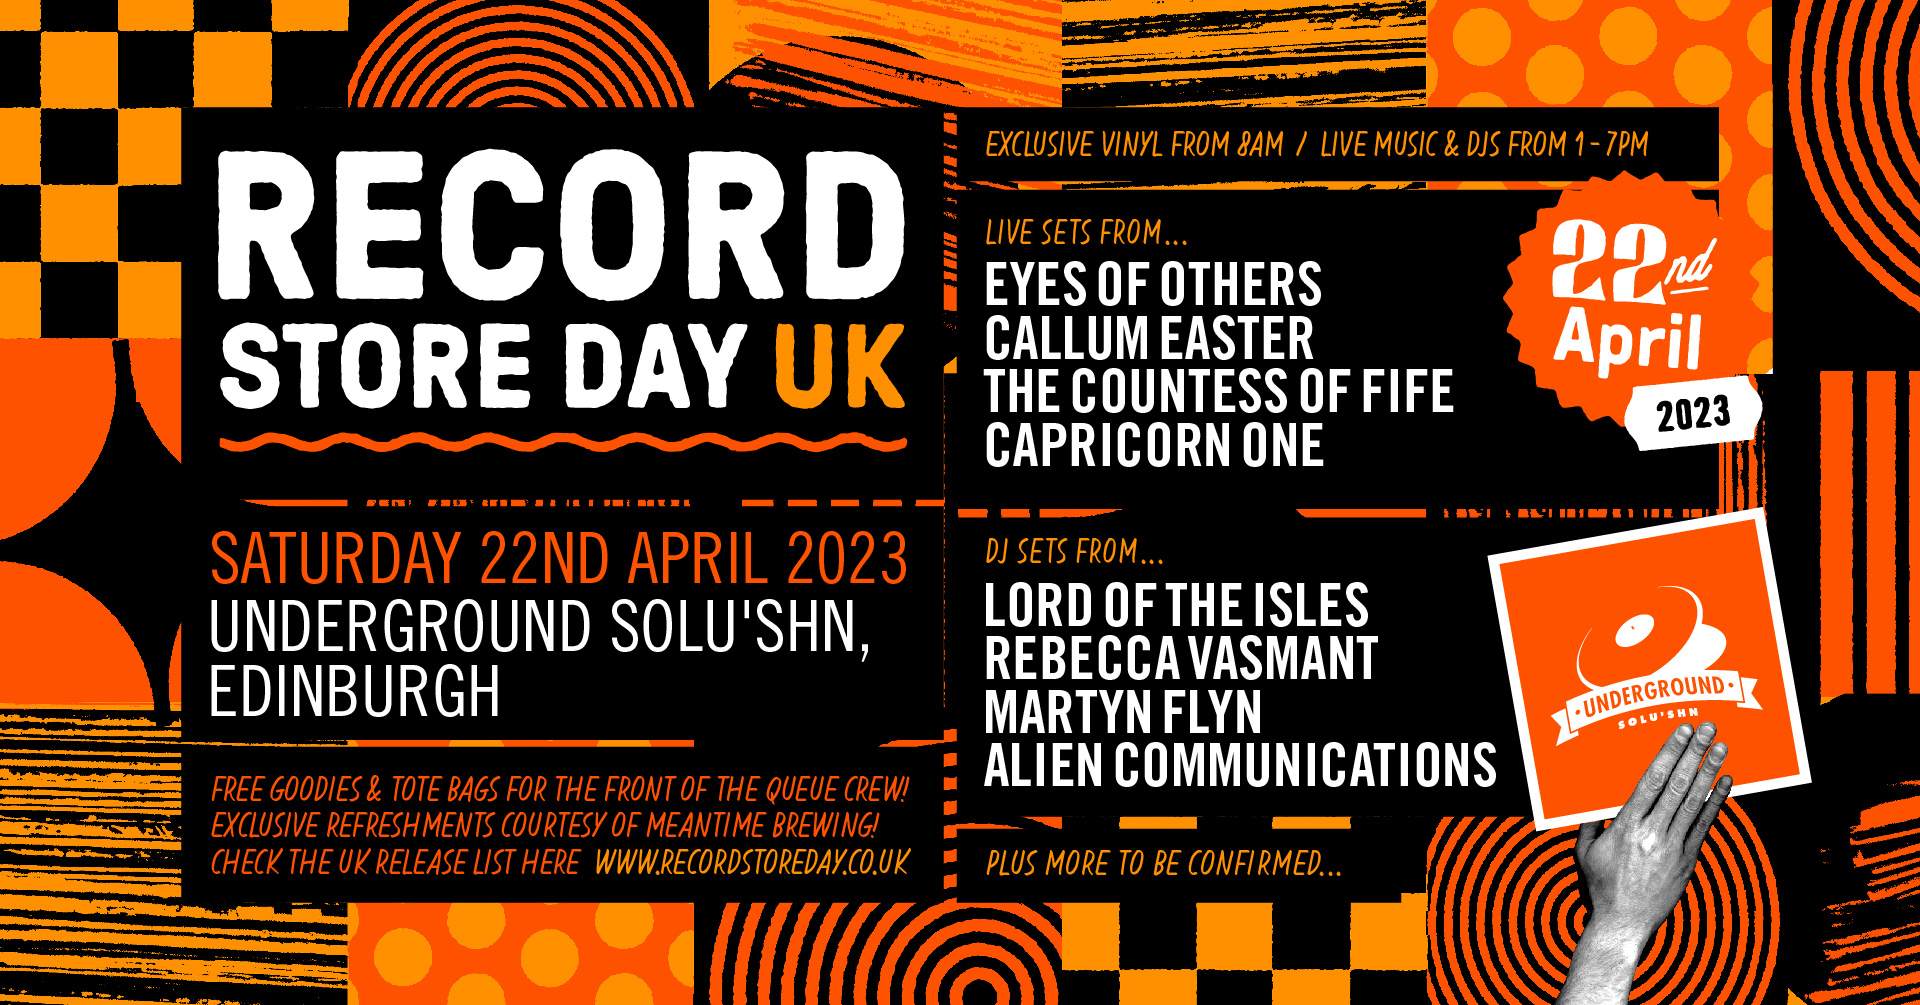 Record Store Day feat. Lord of the Isles, Eyes of Others, Alien Communications and more - Página frontal